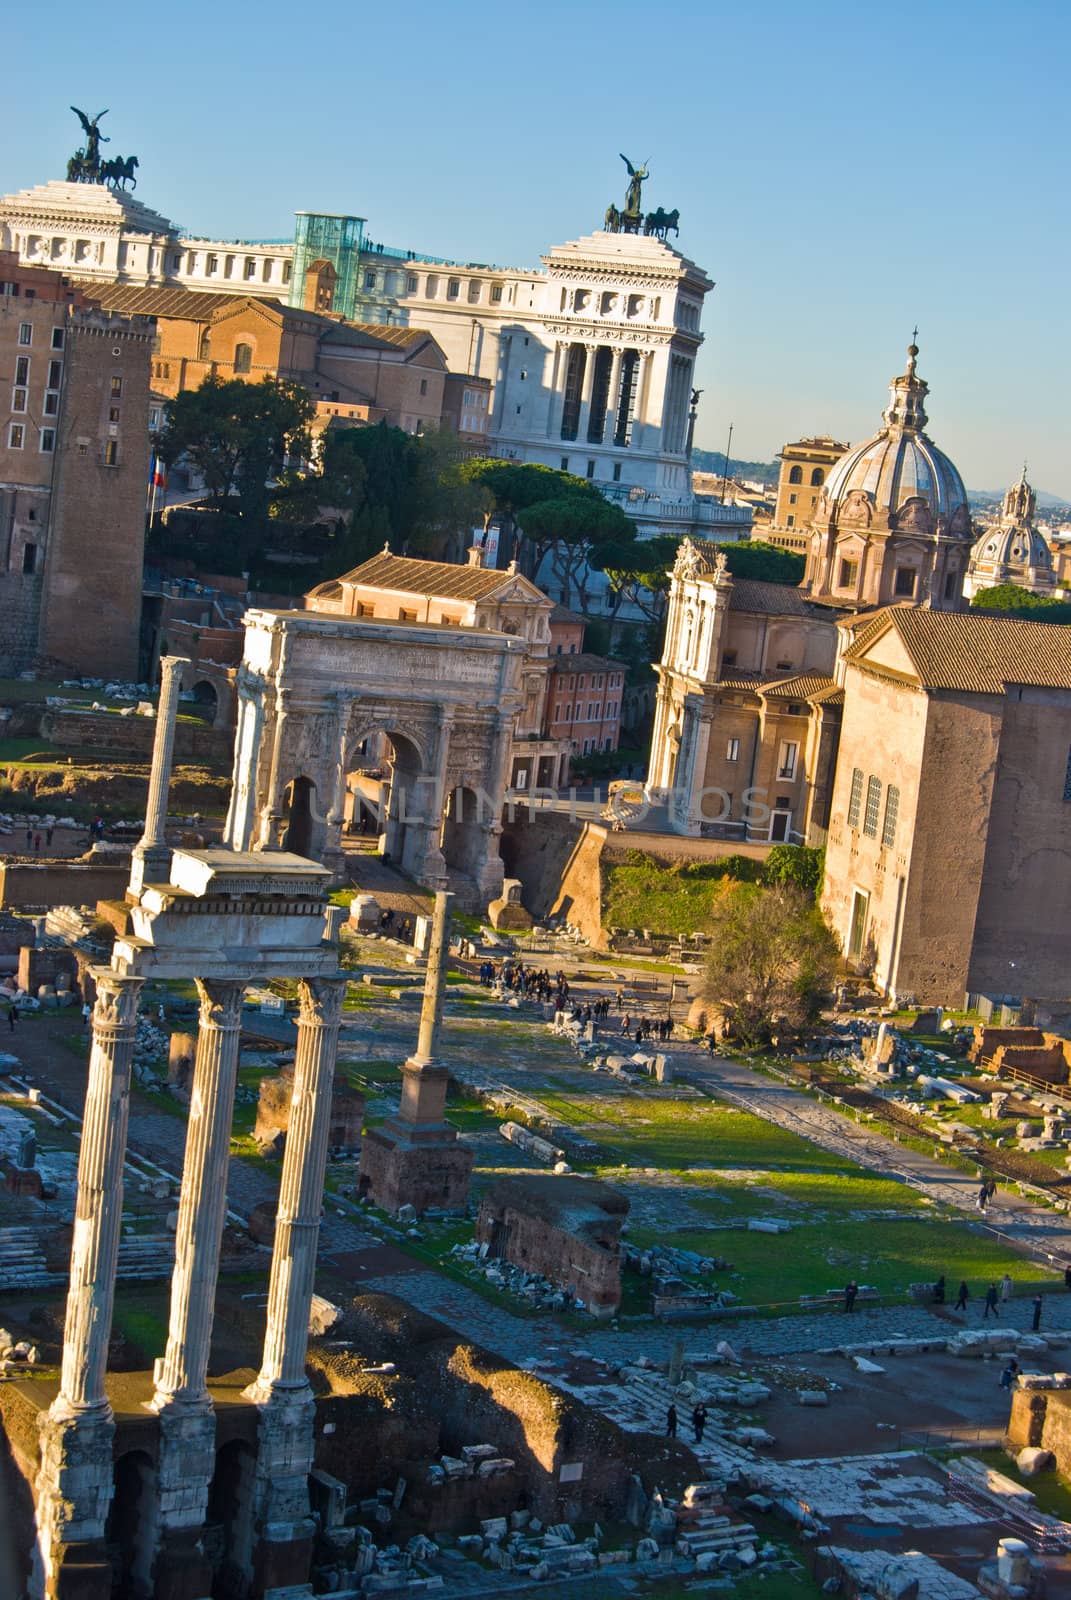 part of the famous Forum Romanum in the city centre of Rome